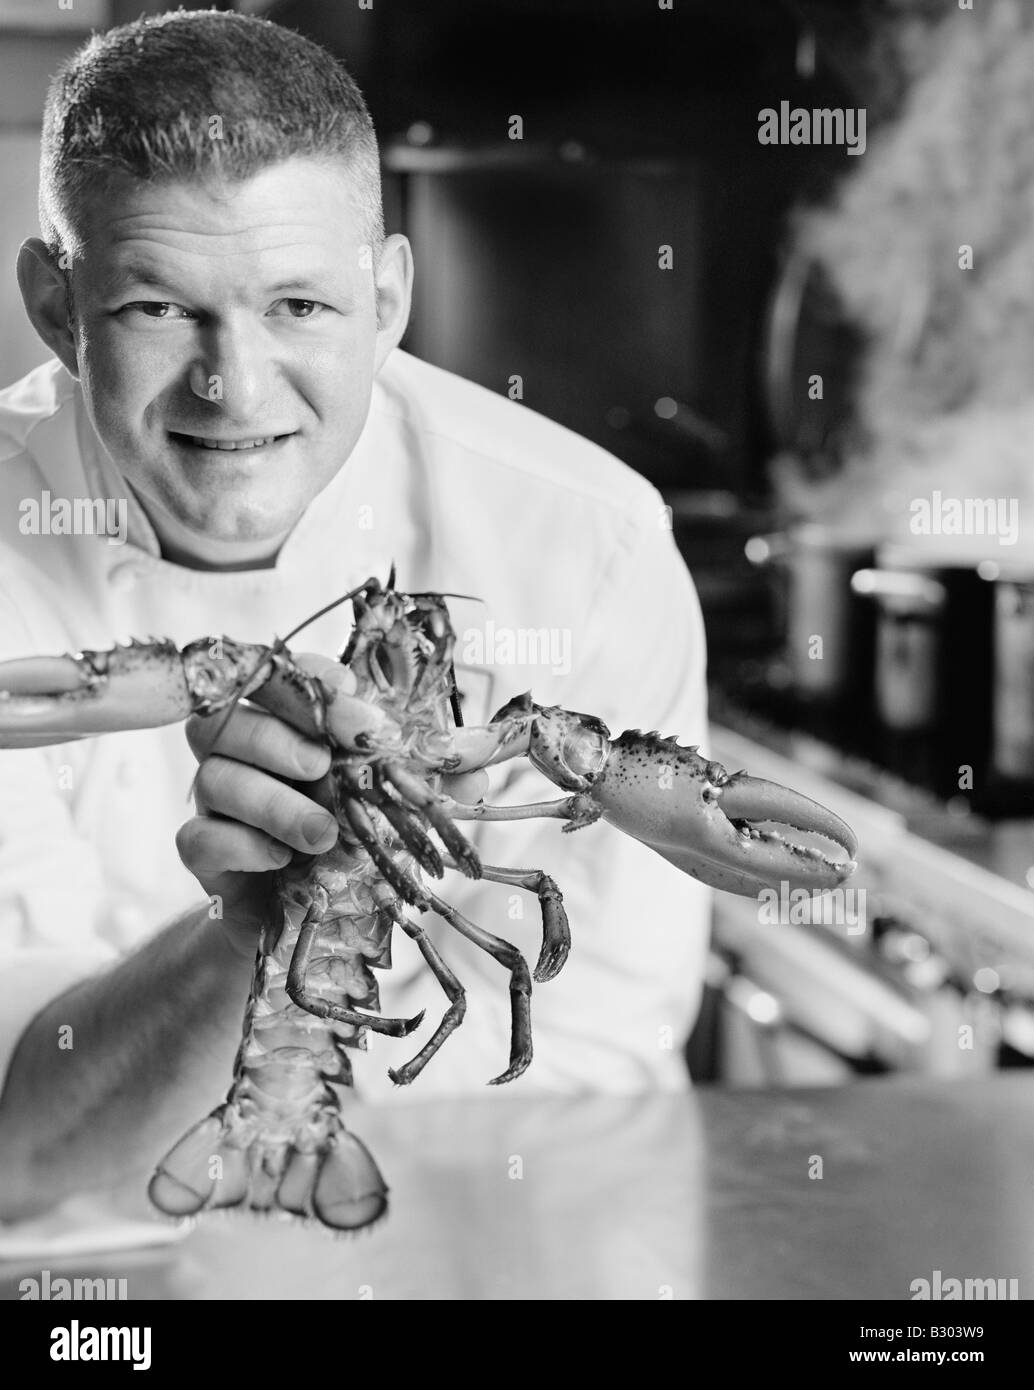 Chef Holding Lobster Stock Photo - Alamy